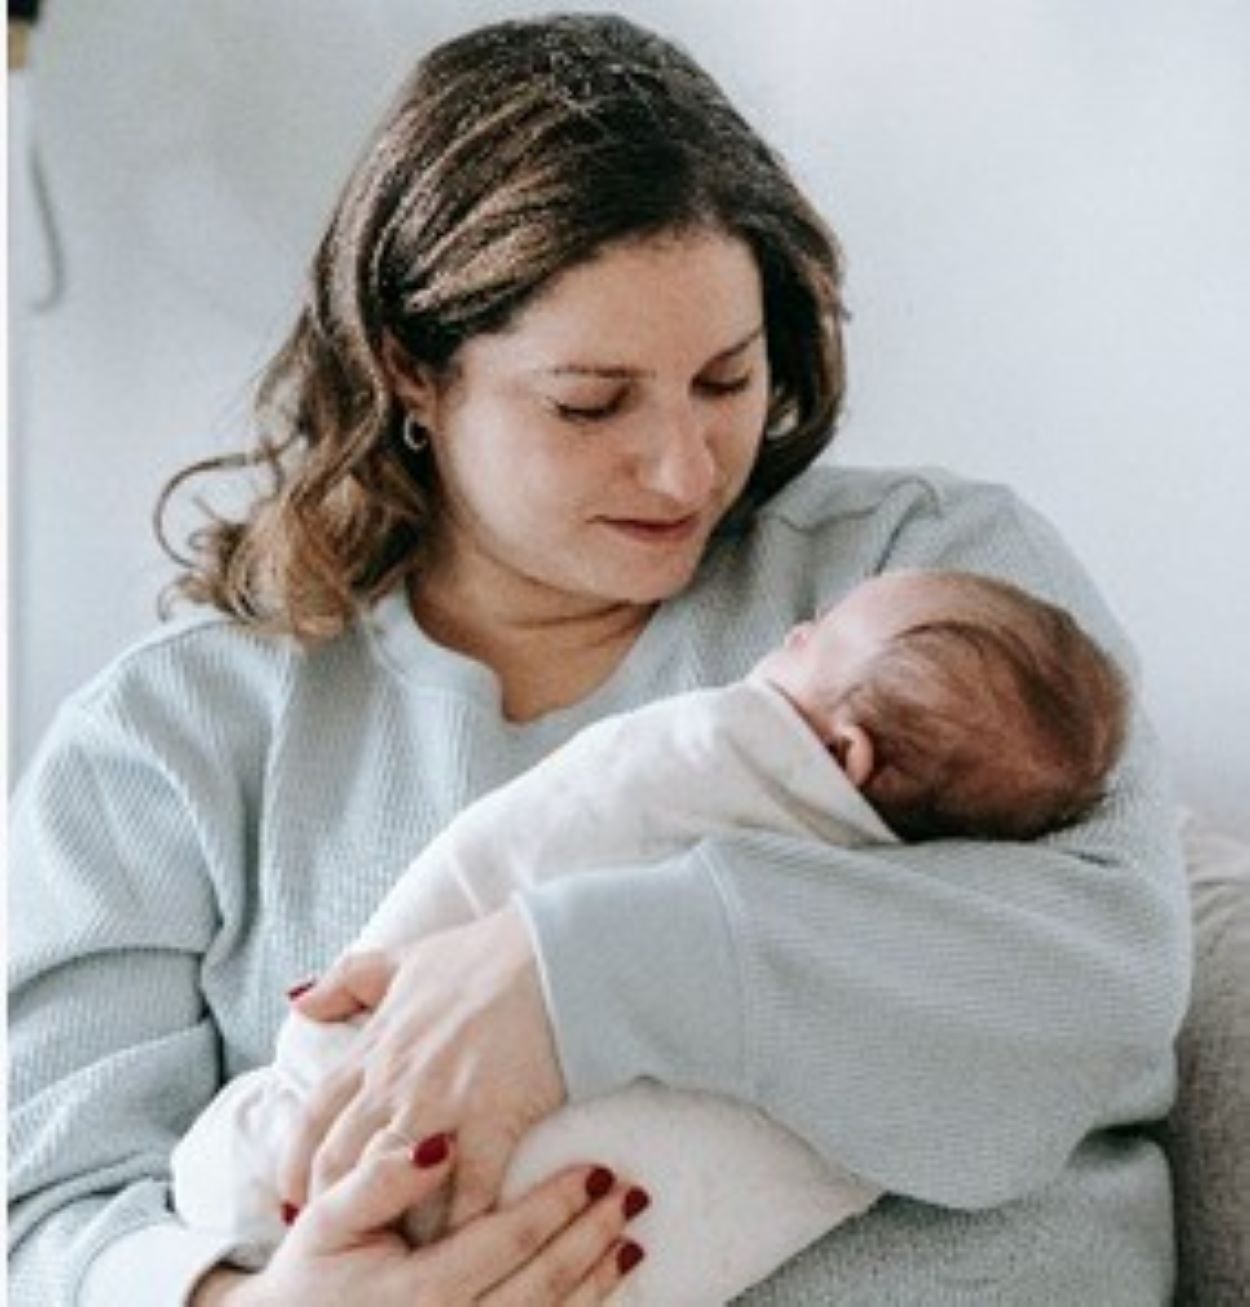 A woman holding her baby